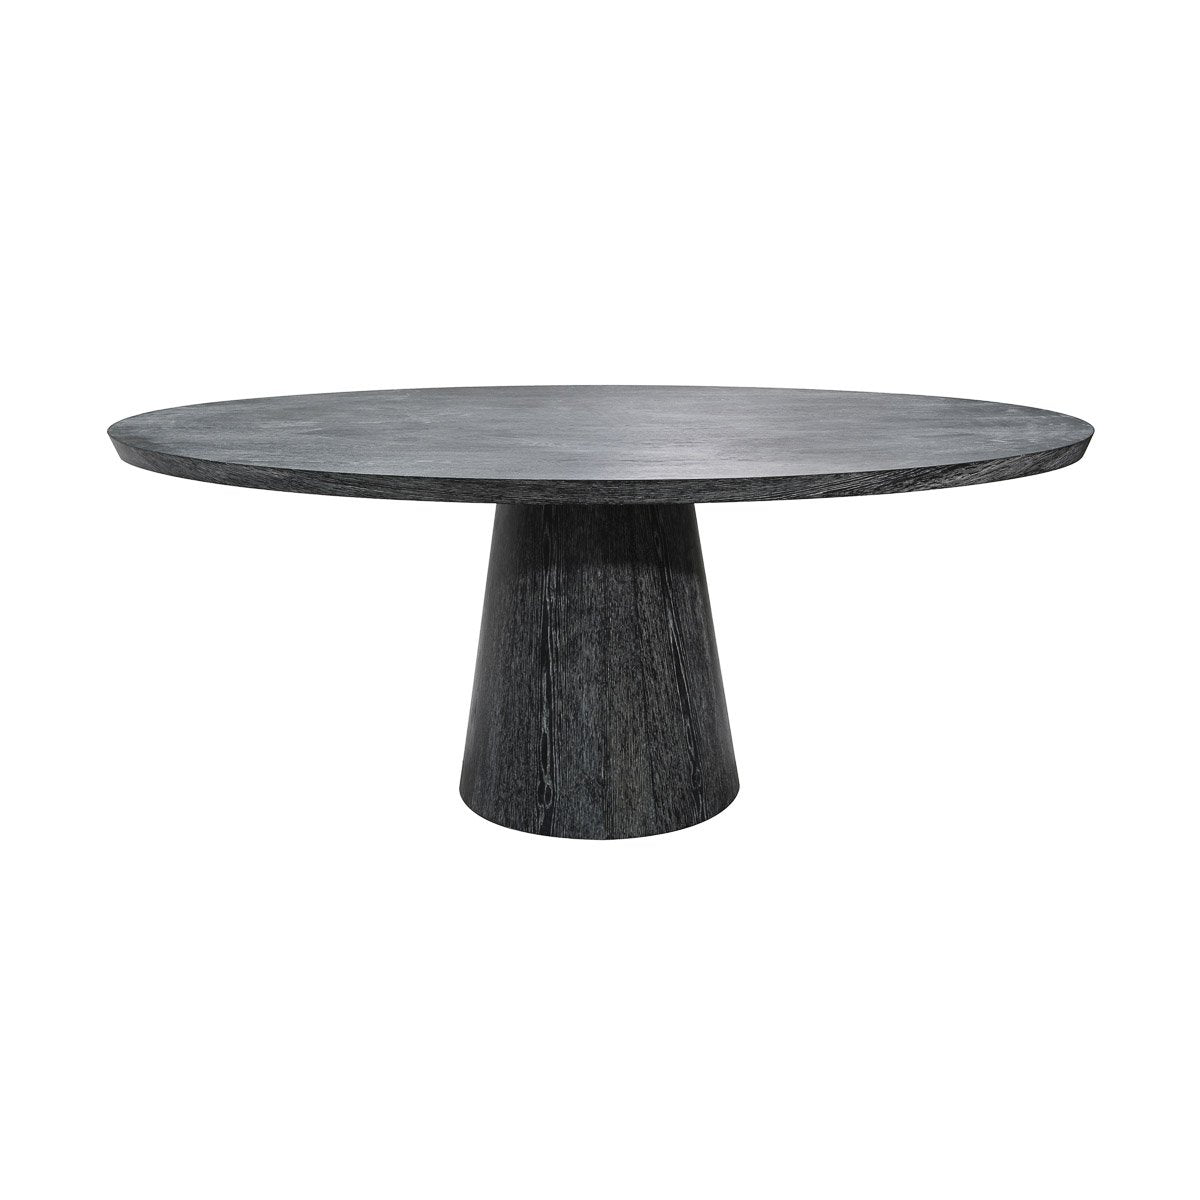 Bristow Oval Dining Table Black Cerused Oak. Front view. 